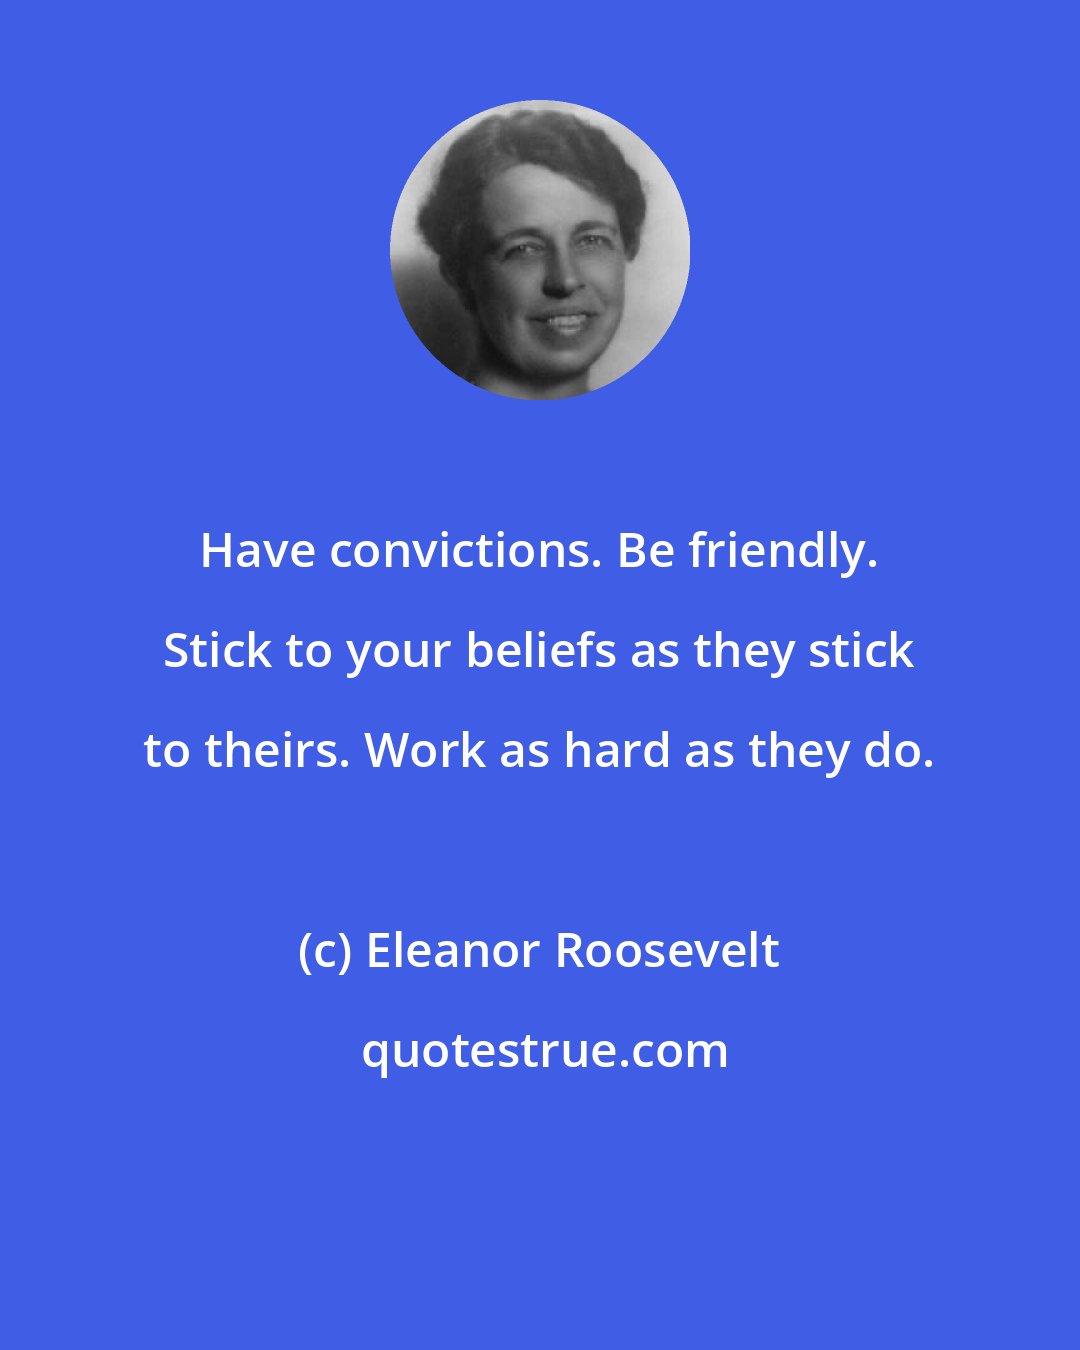 Eleanor Roosevelt: Have convictions. Be friendly. Stick to your beliefs as they stick to theirs. Work as hard as they do.